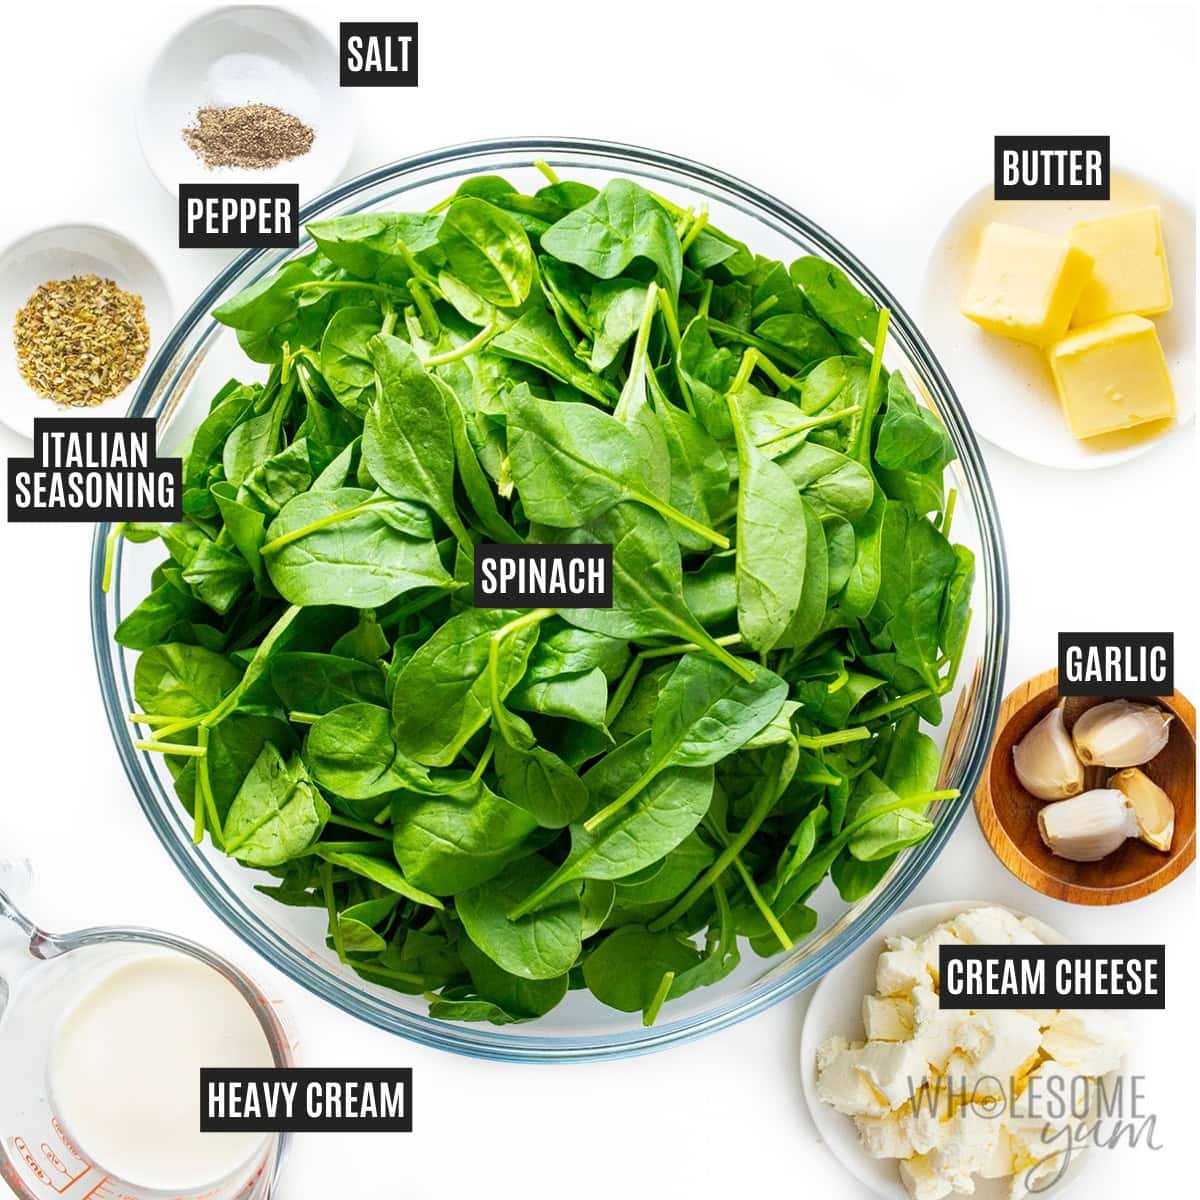 Bowl of spinach next to cream, butter, garlic, cream cheese, and spices.